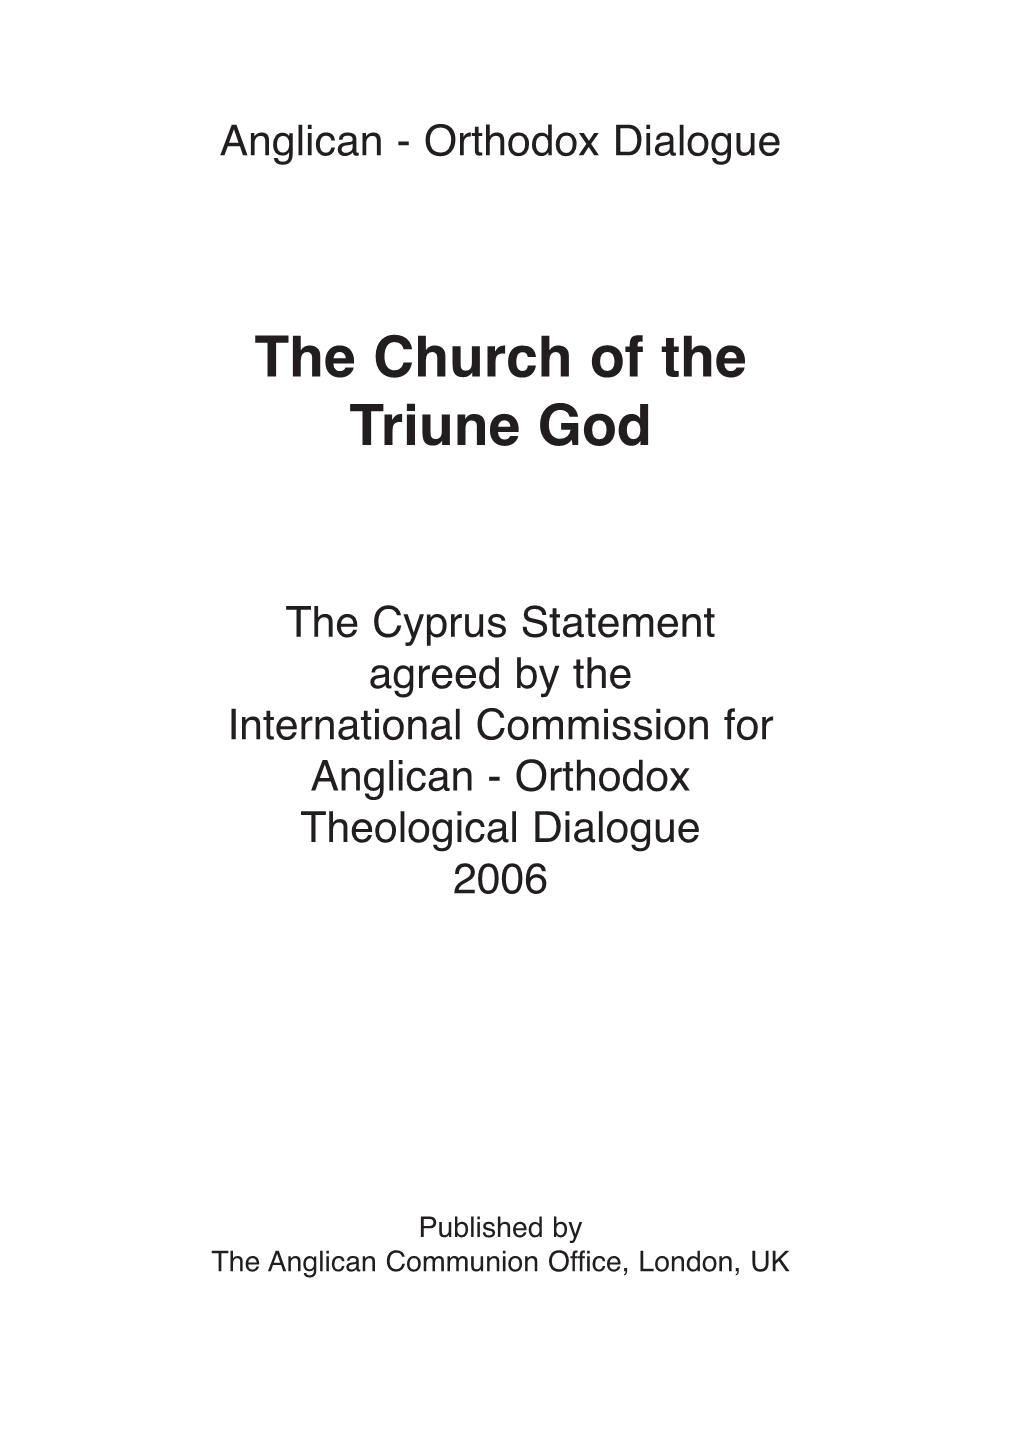 The Church of the Triune God